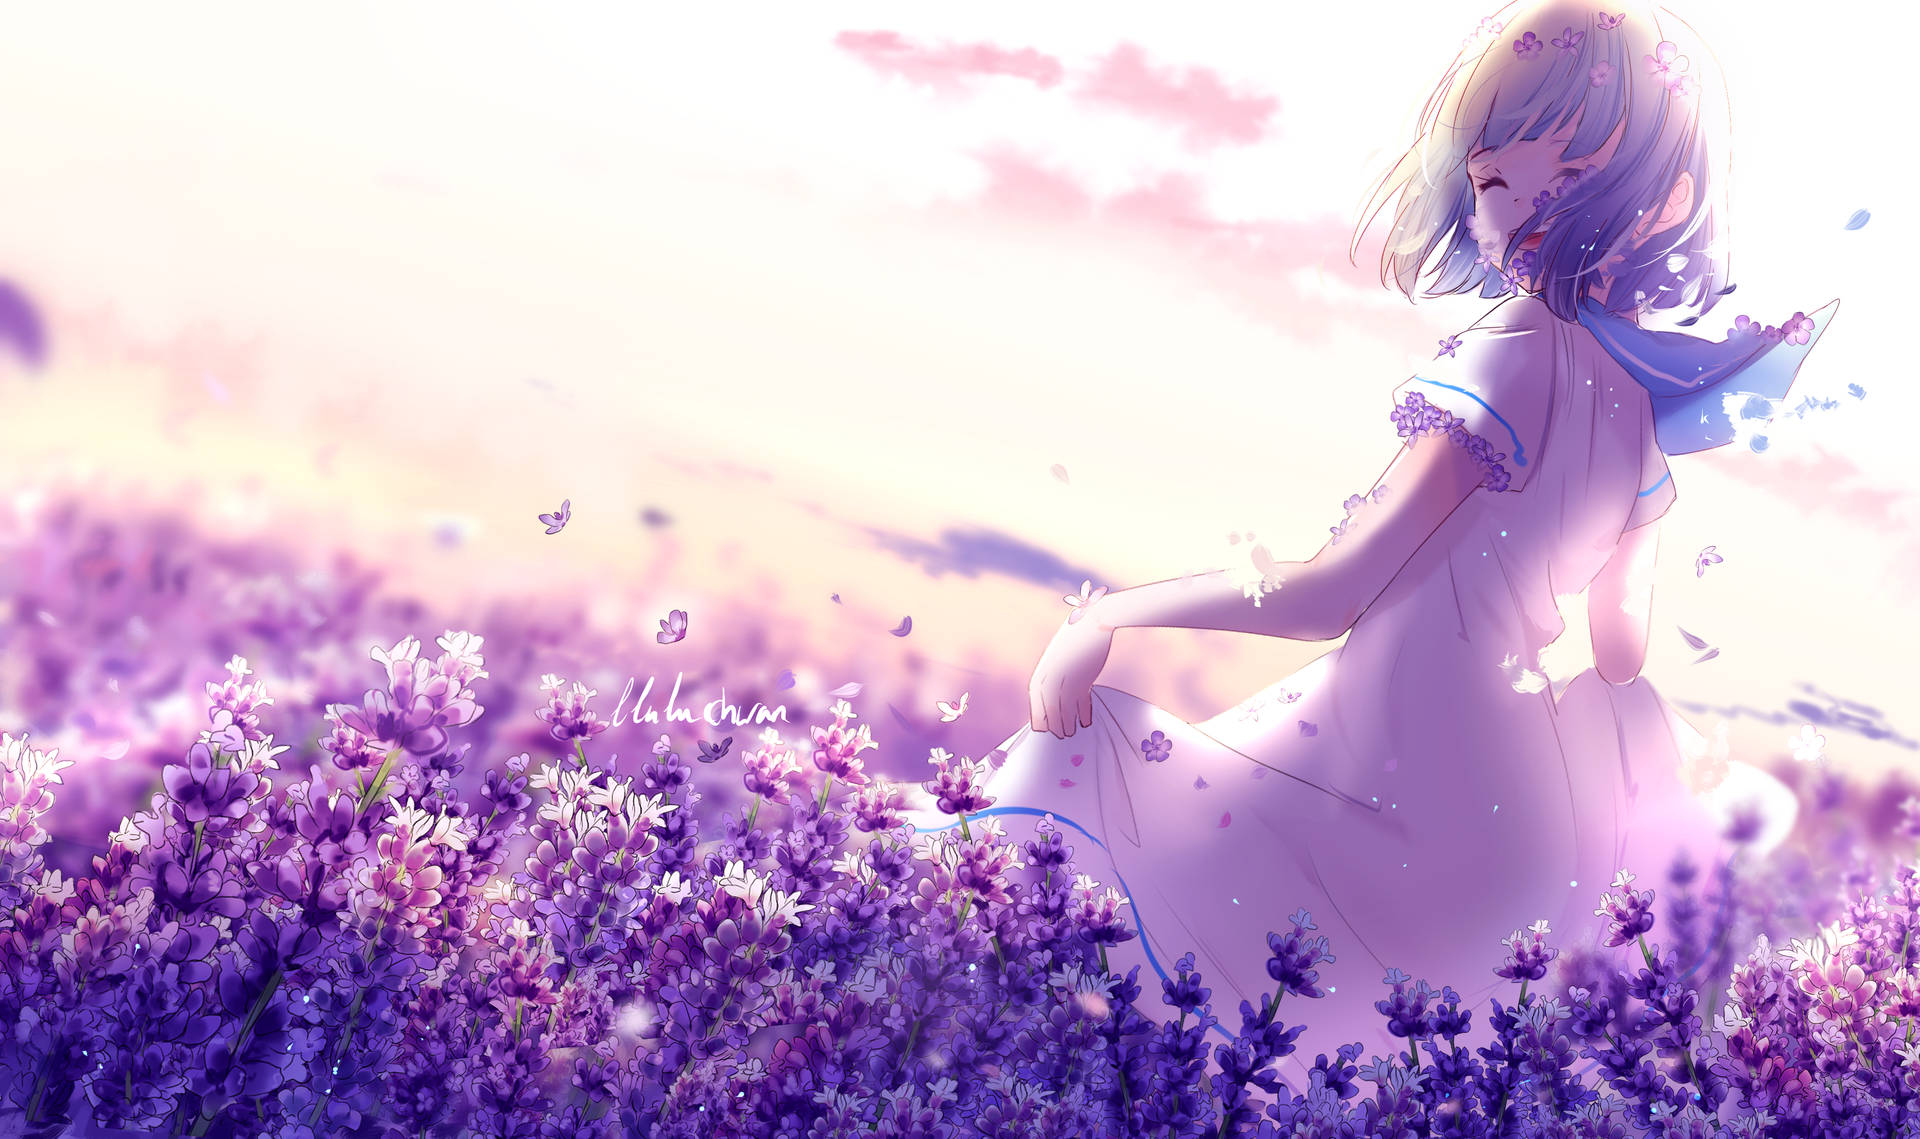 Serenity Of Spring In 4k: Woman In White Dress Amidst The Blossoming Flower Field Background